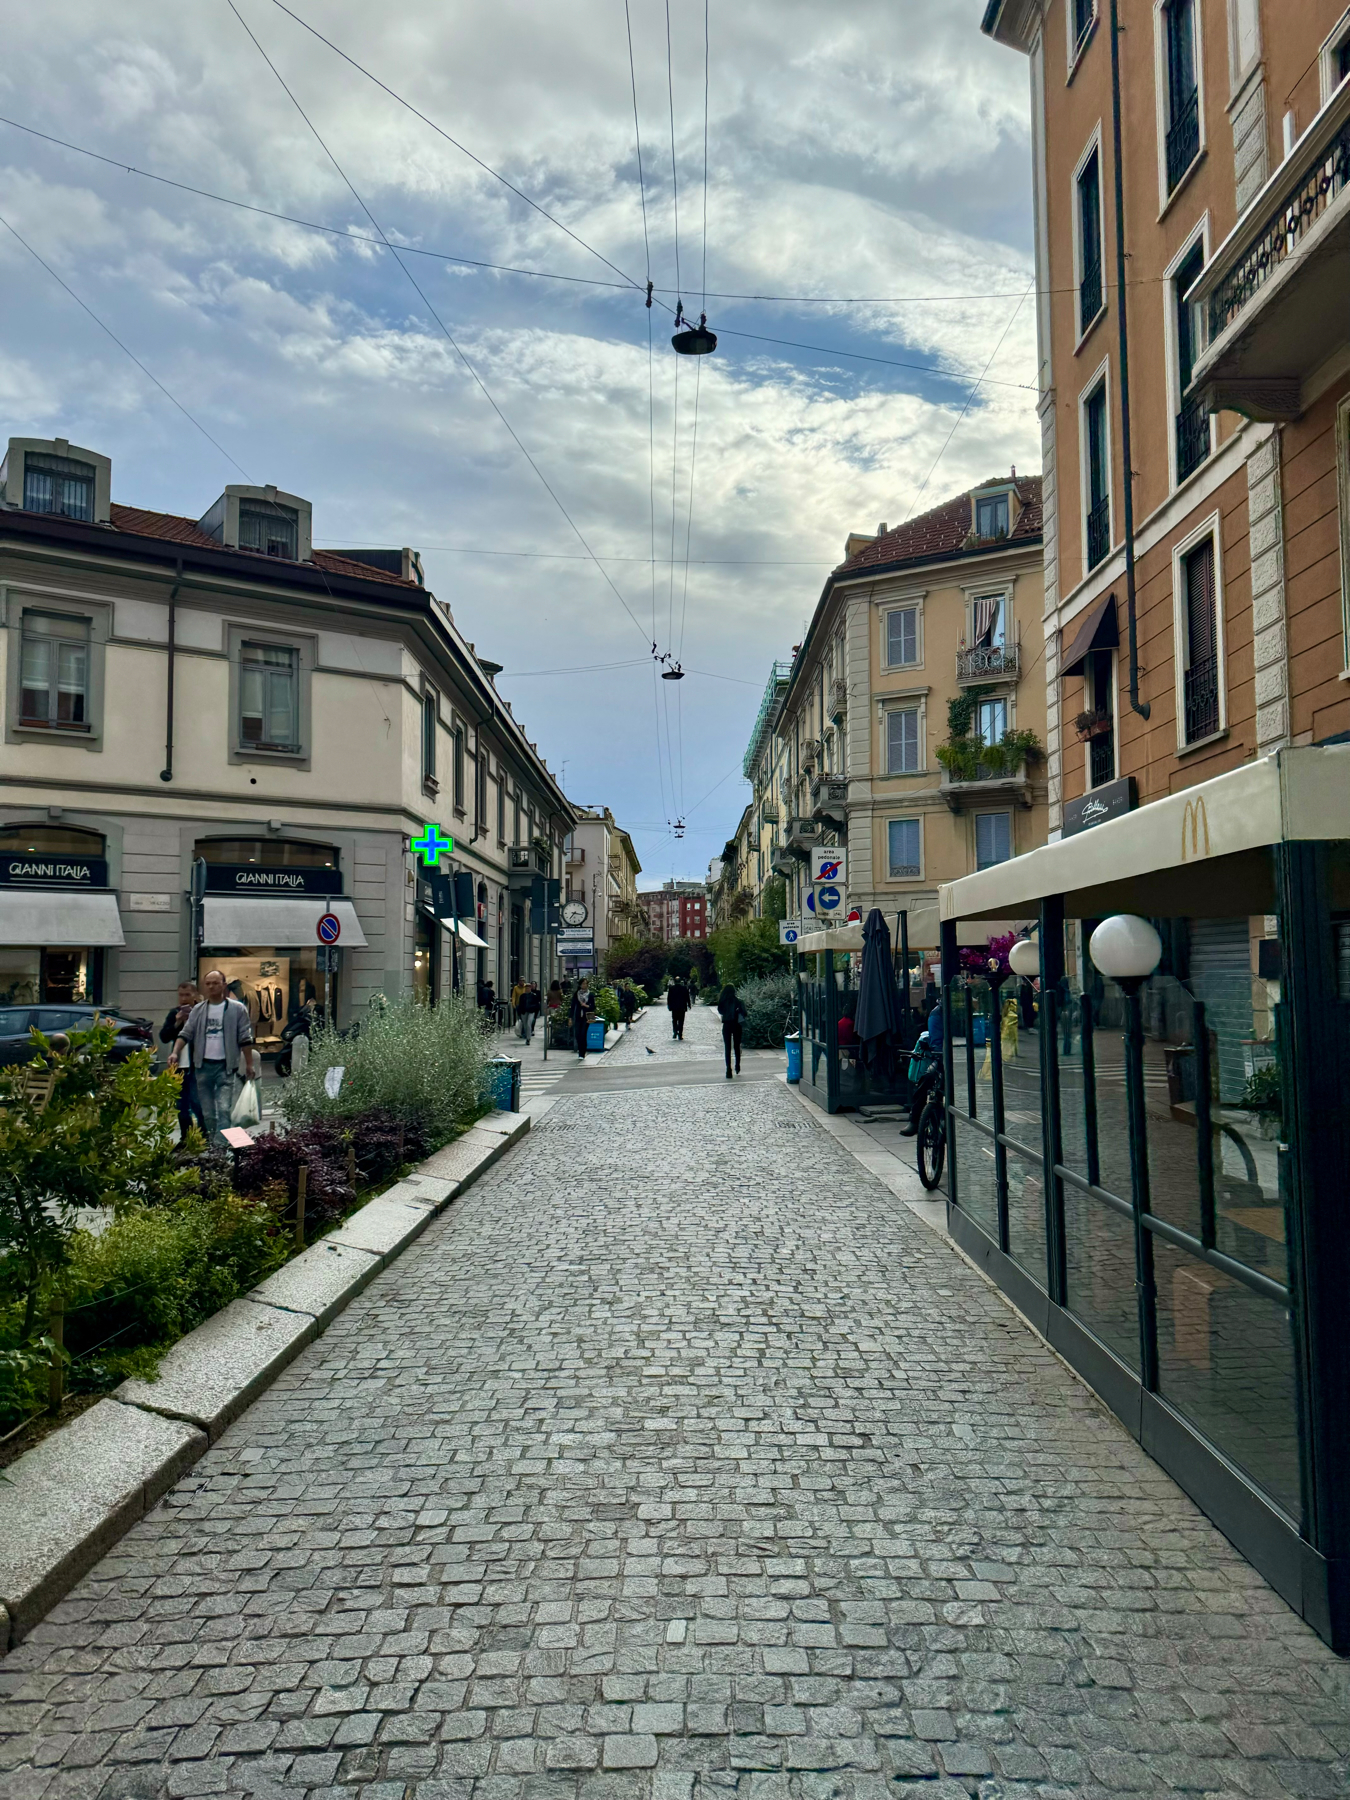 A cobblestone pedestrian street lined with shops and buildings. Overhead, wires cross the partly cloudy sky. Some people are walking and shopping, with greenery and plants adorning the sides of the path.